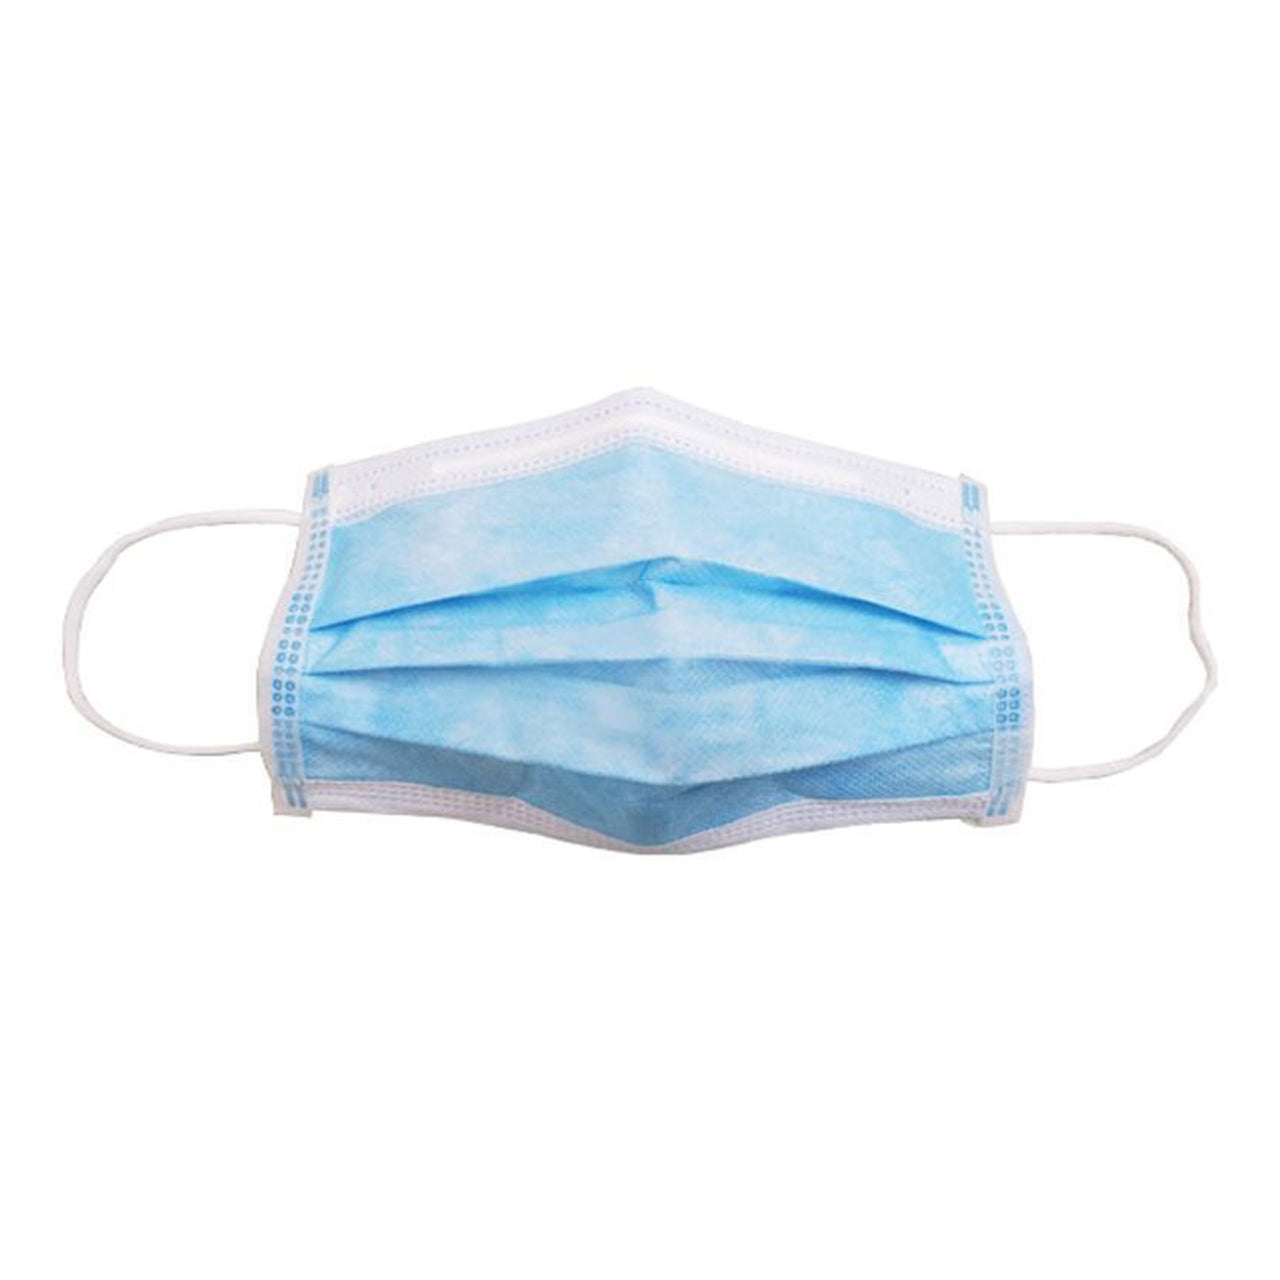 MYKYC 3PLY DISPOSABLE SURGICAL MASK 2000PCS